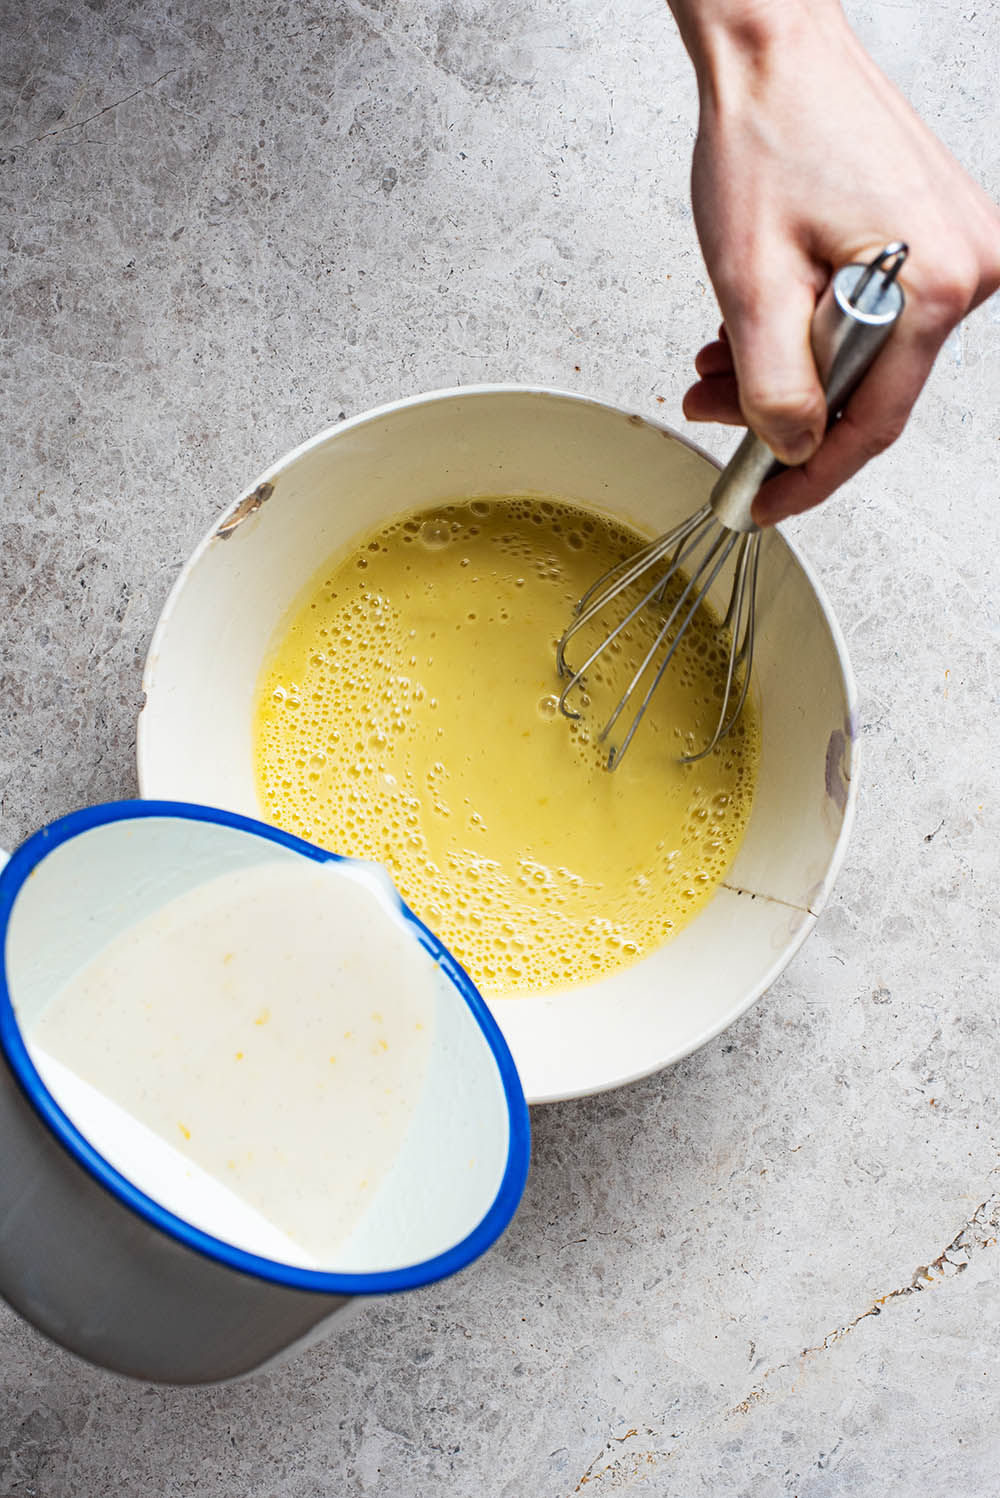 Slowly pouring the cream mixture into the yolks and whisking.